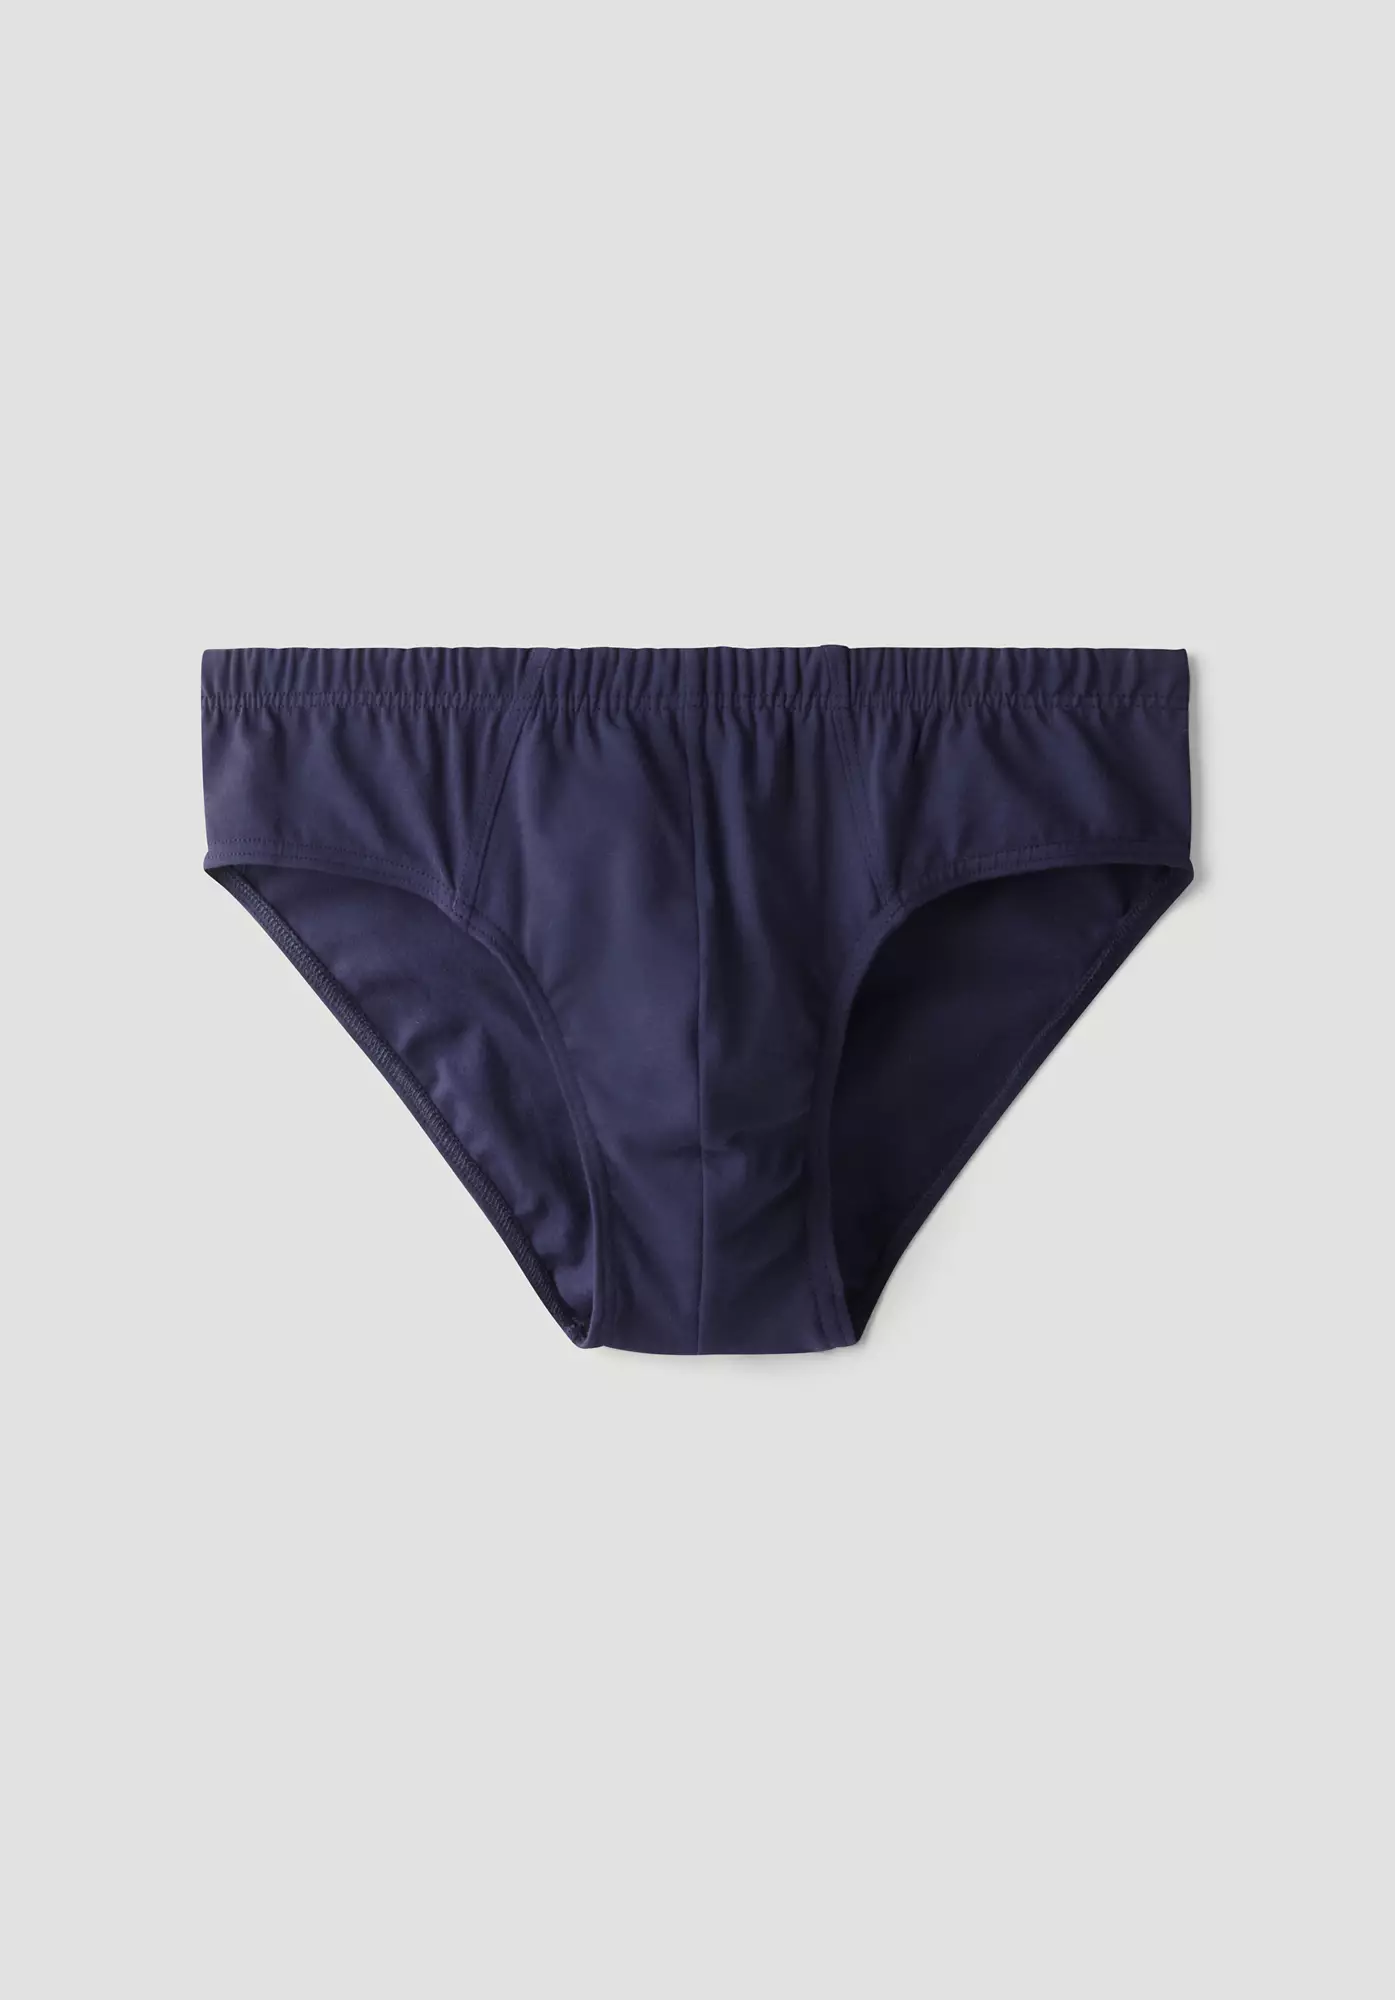 PureLUX briefs in a set of 2 made of organic cotton - 3